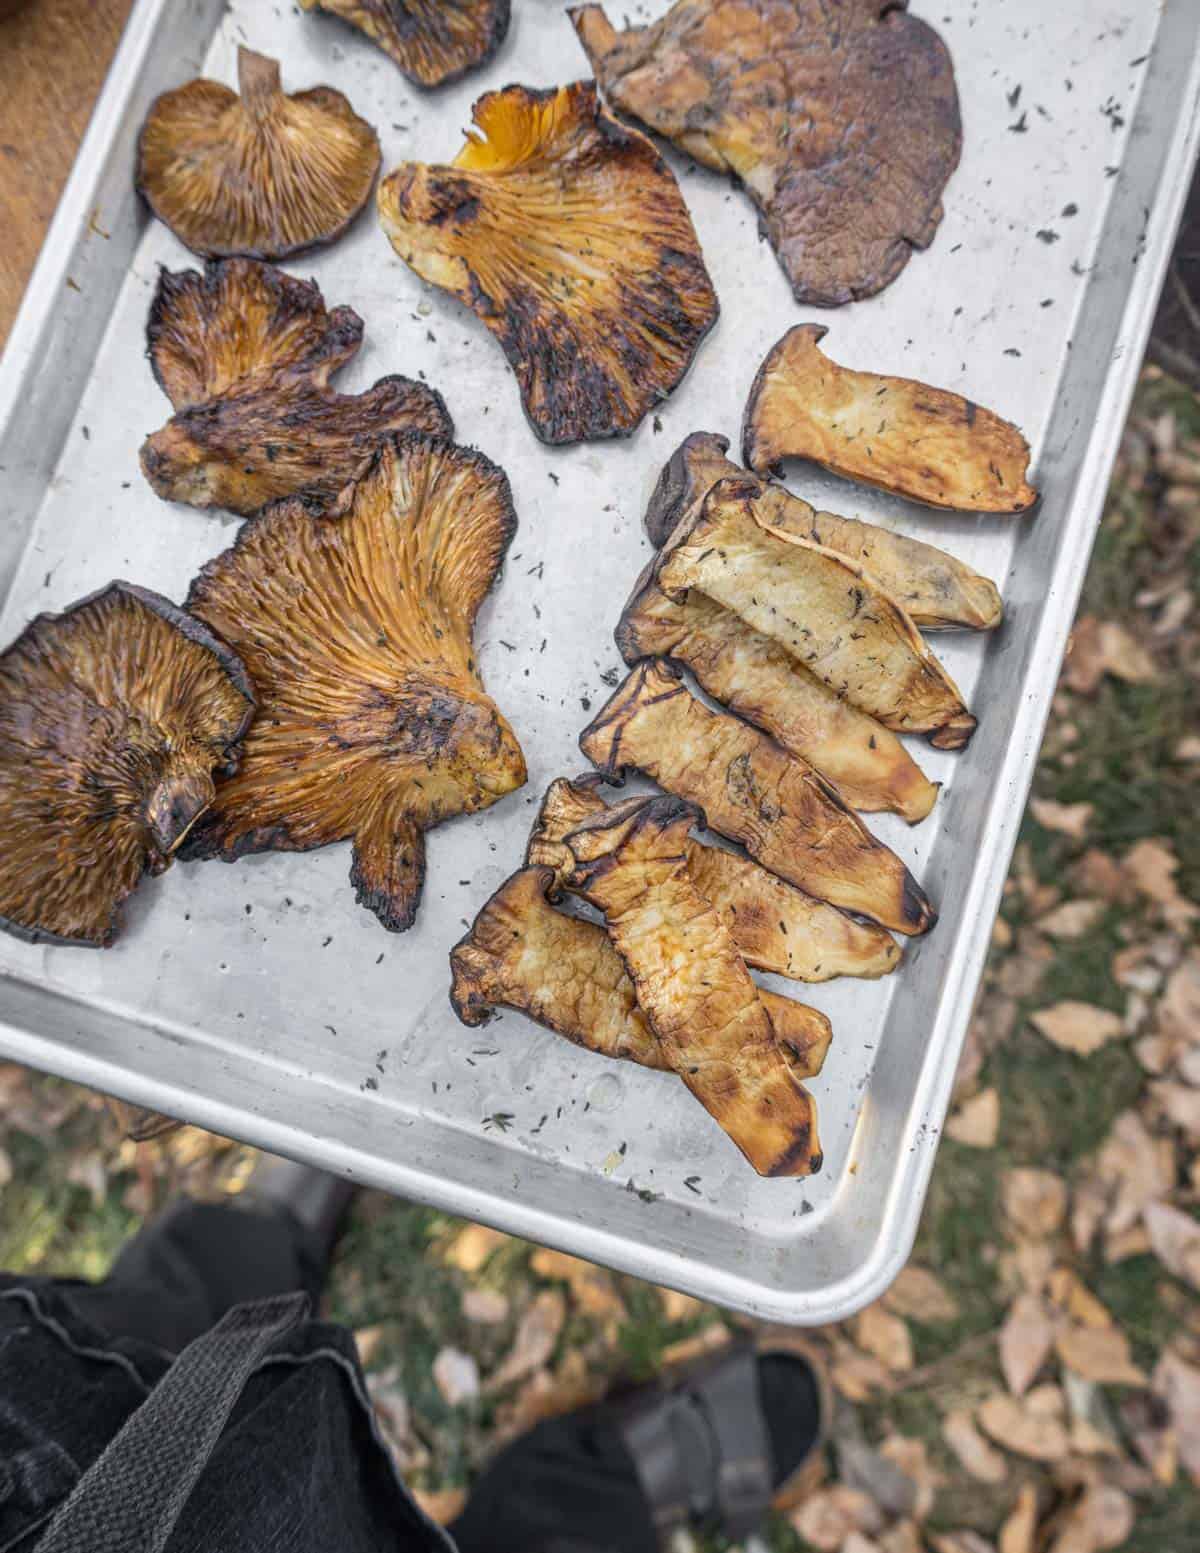 Grilled king oyster mushrooms, fall oysters, and blue oyster mushrooms. 